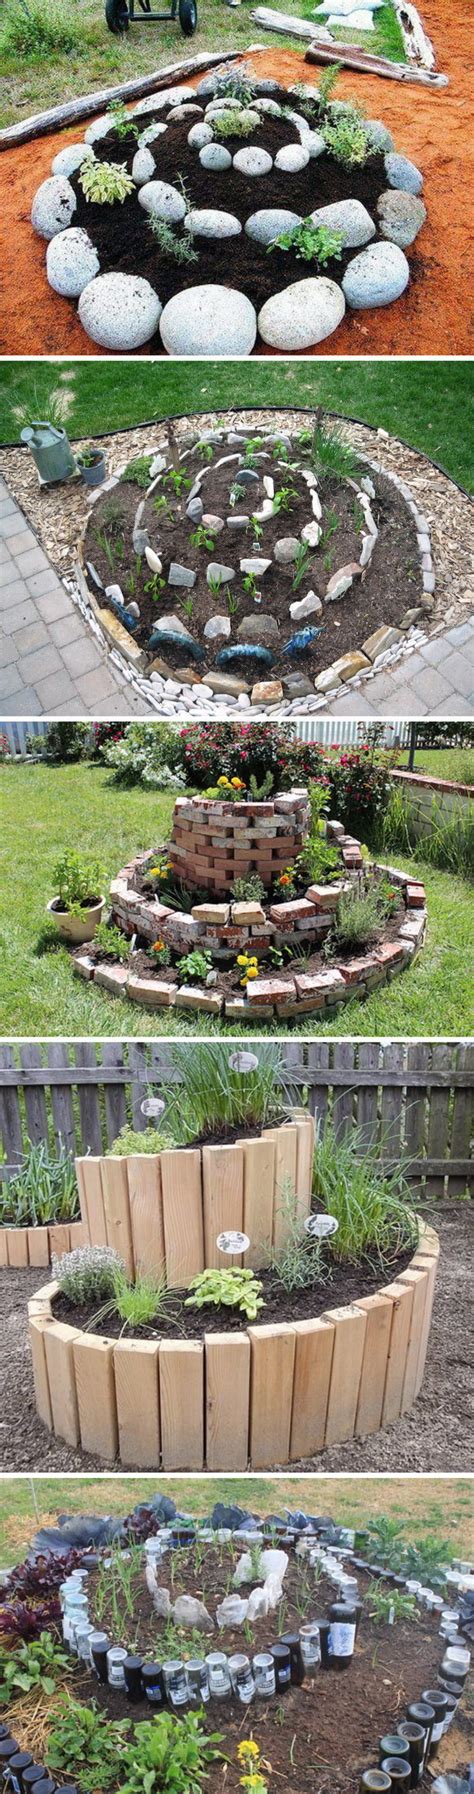 Last updated january 6, 2020. 20 Cool DIY Garden Bed and Planter Ideas | Styletic